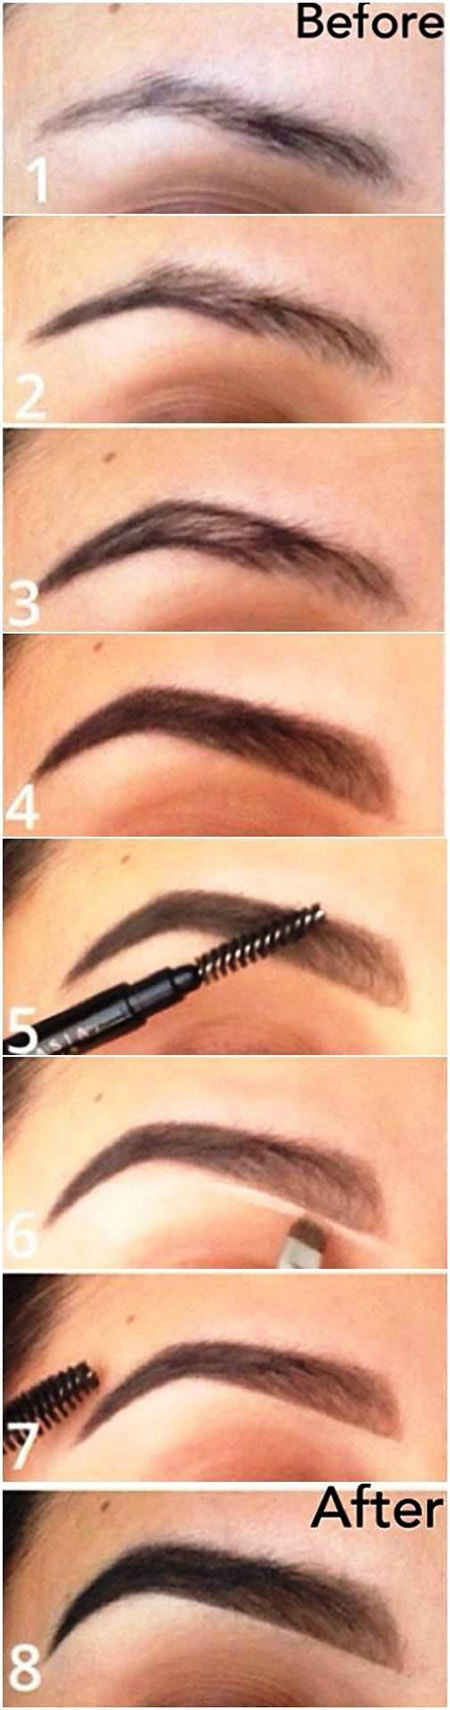 2 How To Make Your Eyebrows Thicker 17df197a7